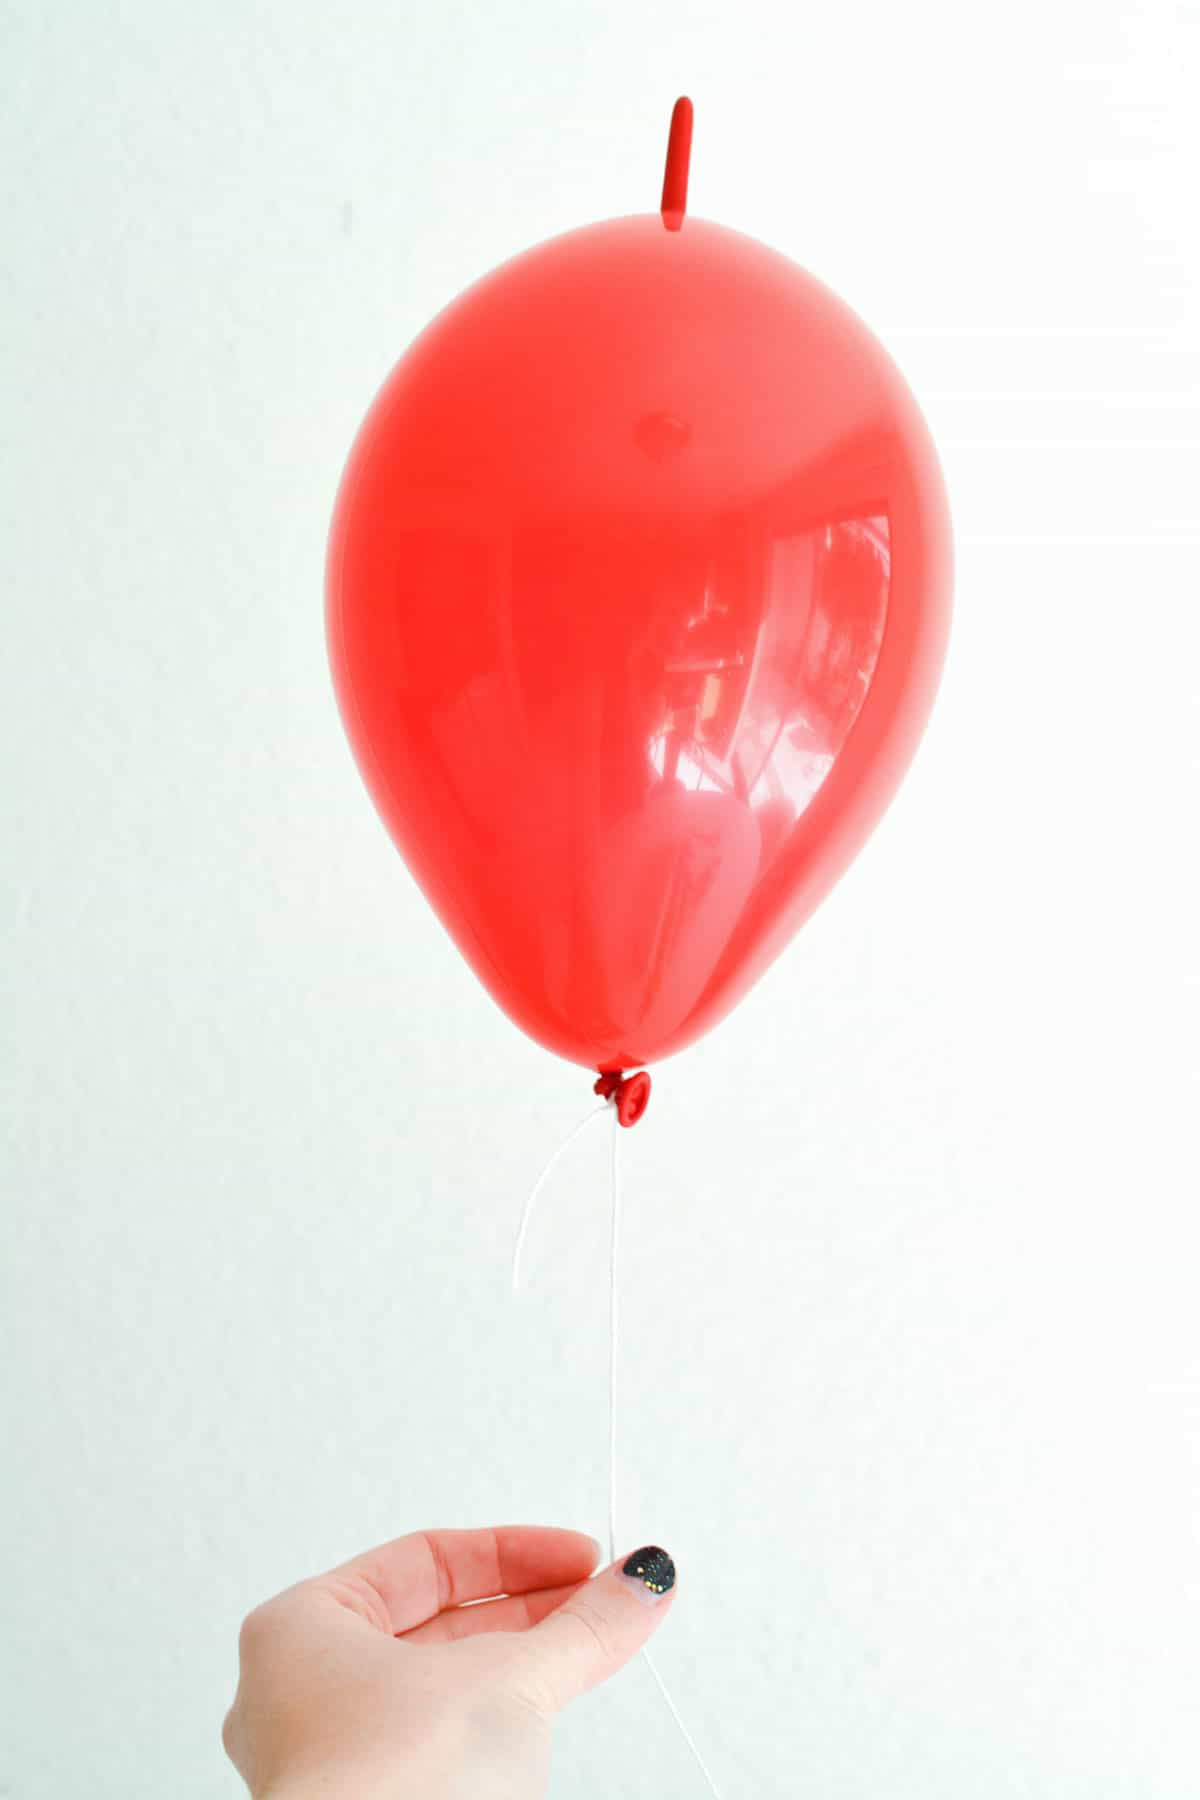 A hand holding a string attached to a small red linking balloon.